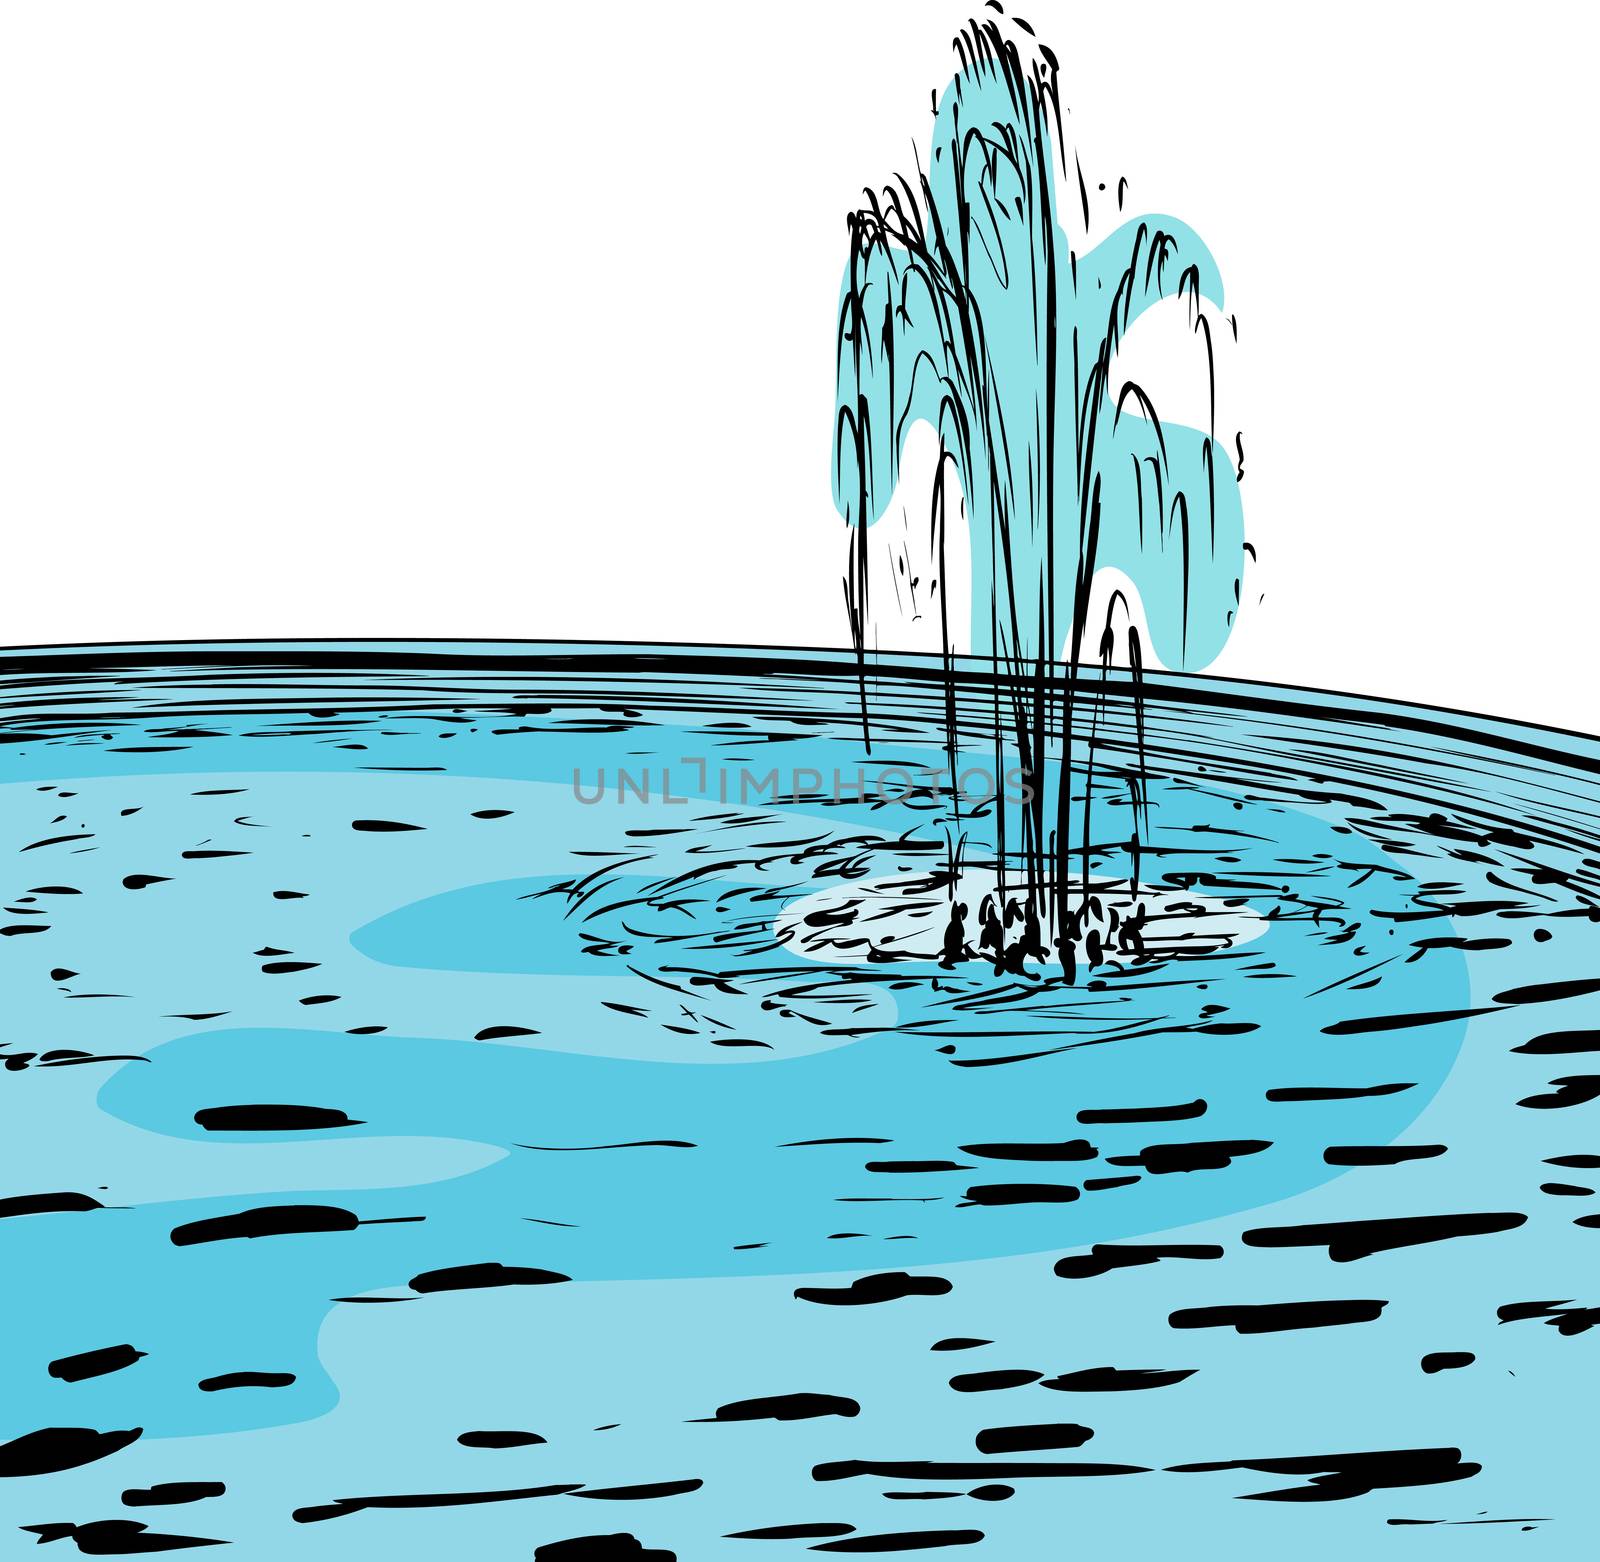 Doodle illustration of water fountain spraying up in round pool